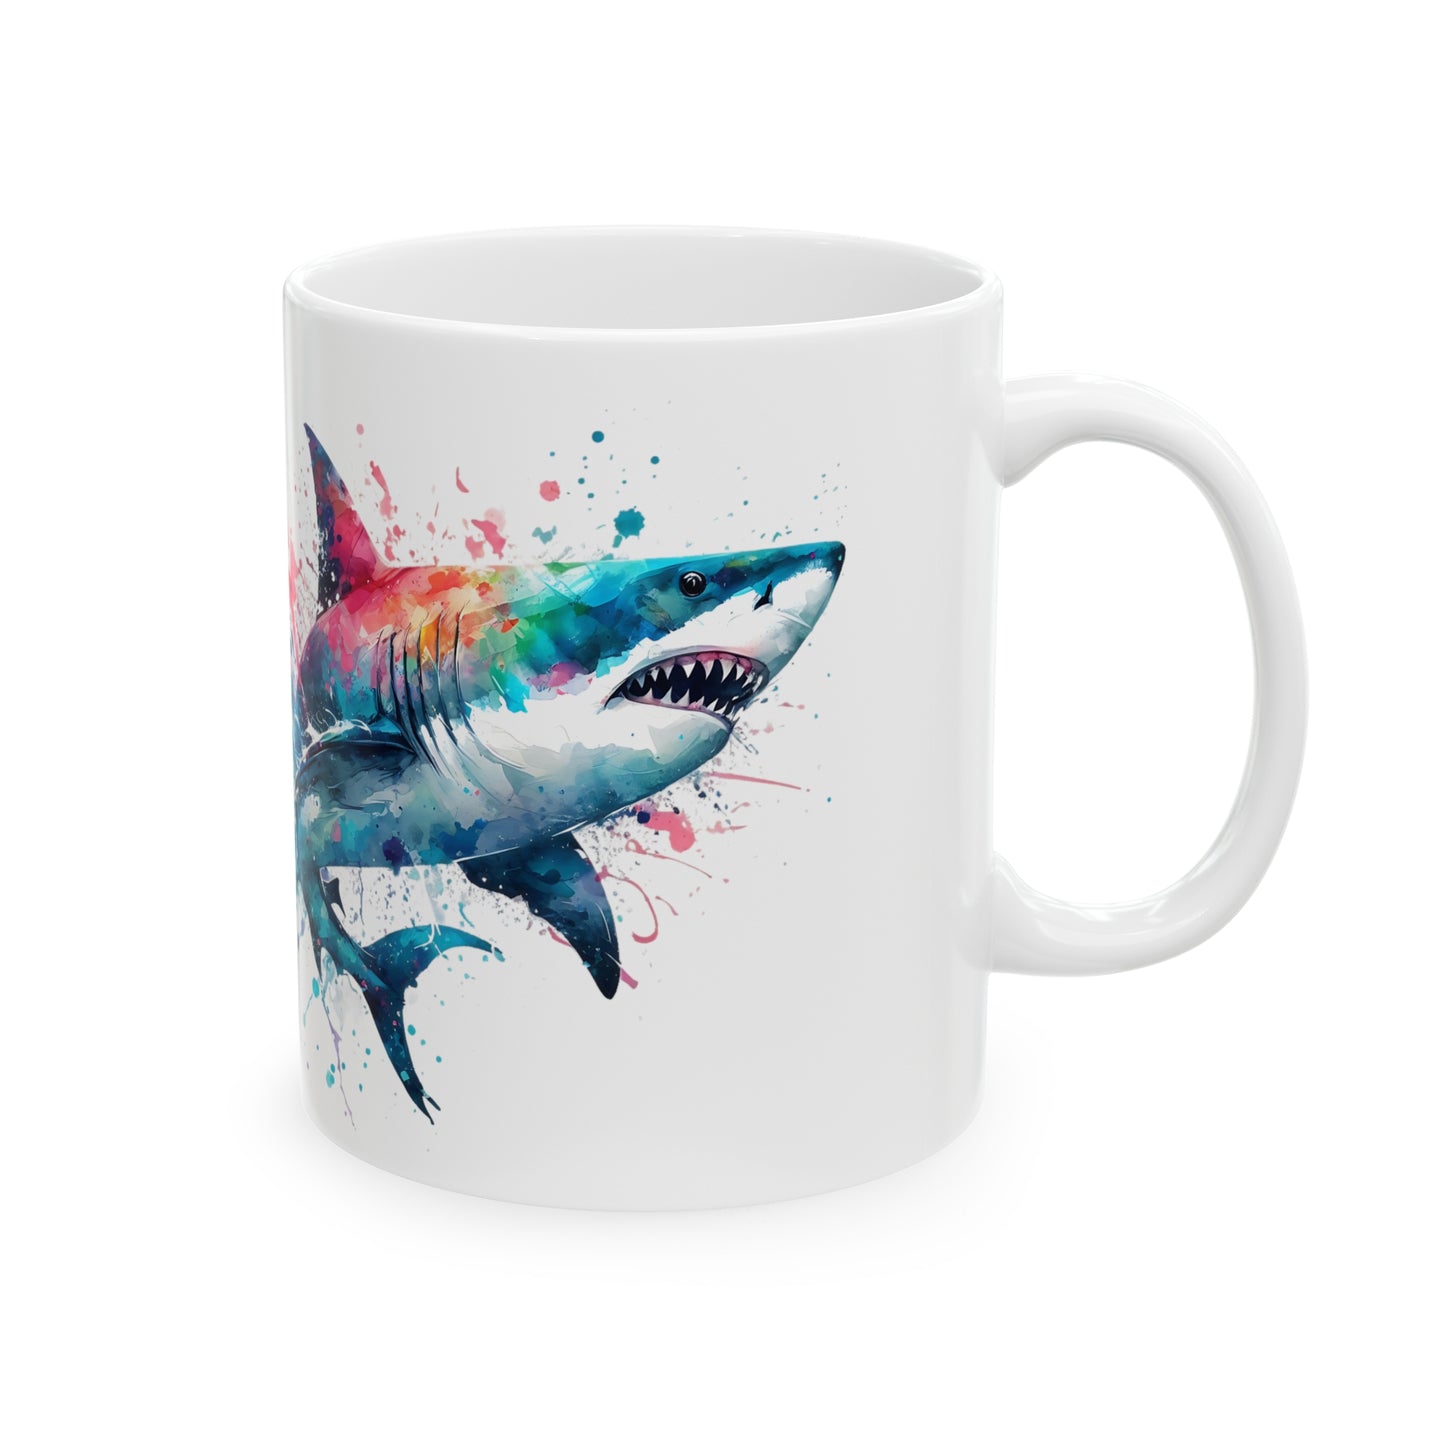 Shark Dad Mug: Father's Day & Birthday Coffee Cup - No-fin Compares to You! Funny Fish Relax Gift for Best Dad, Ceramic Mug, 11oz